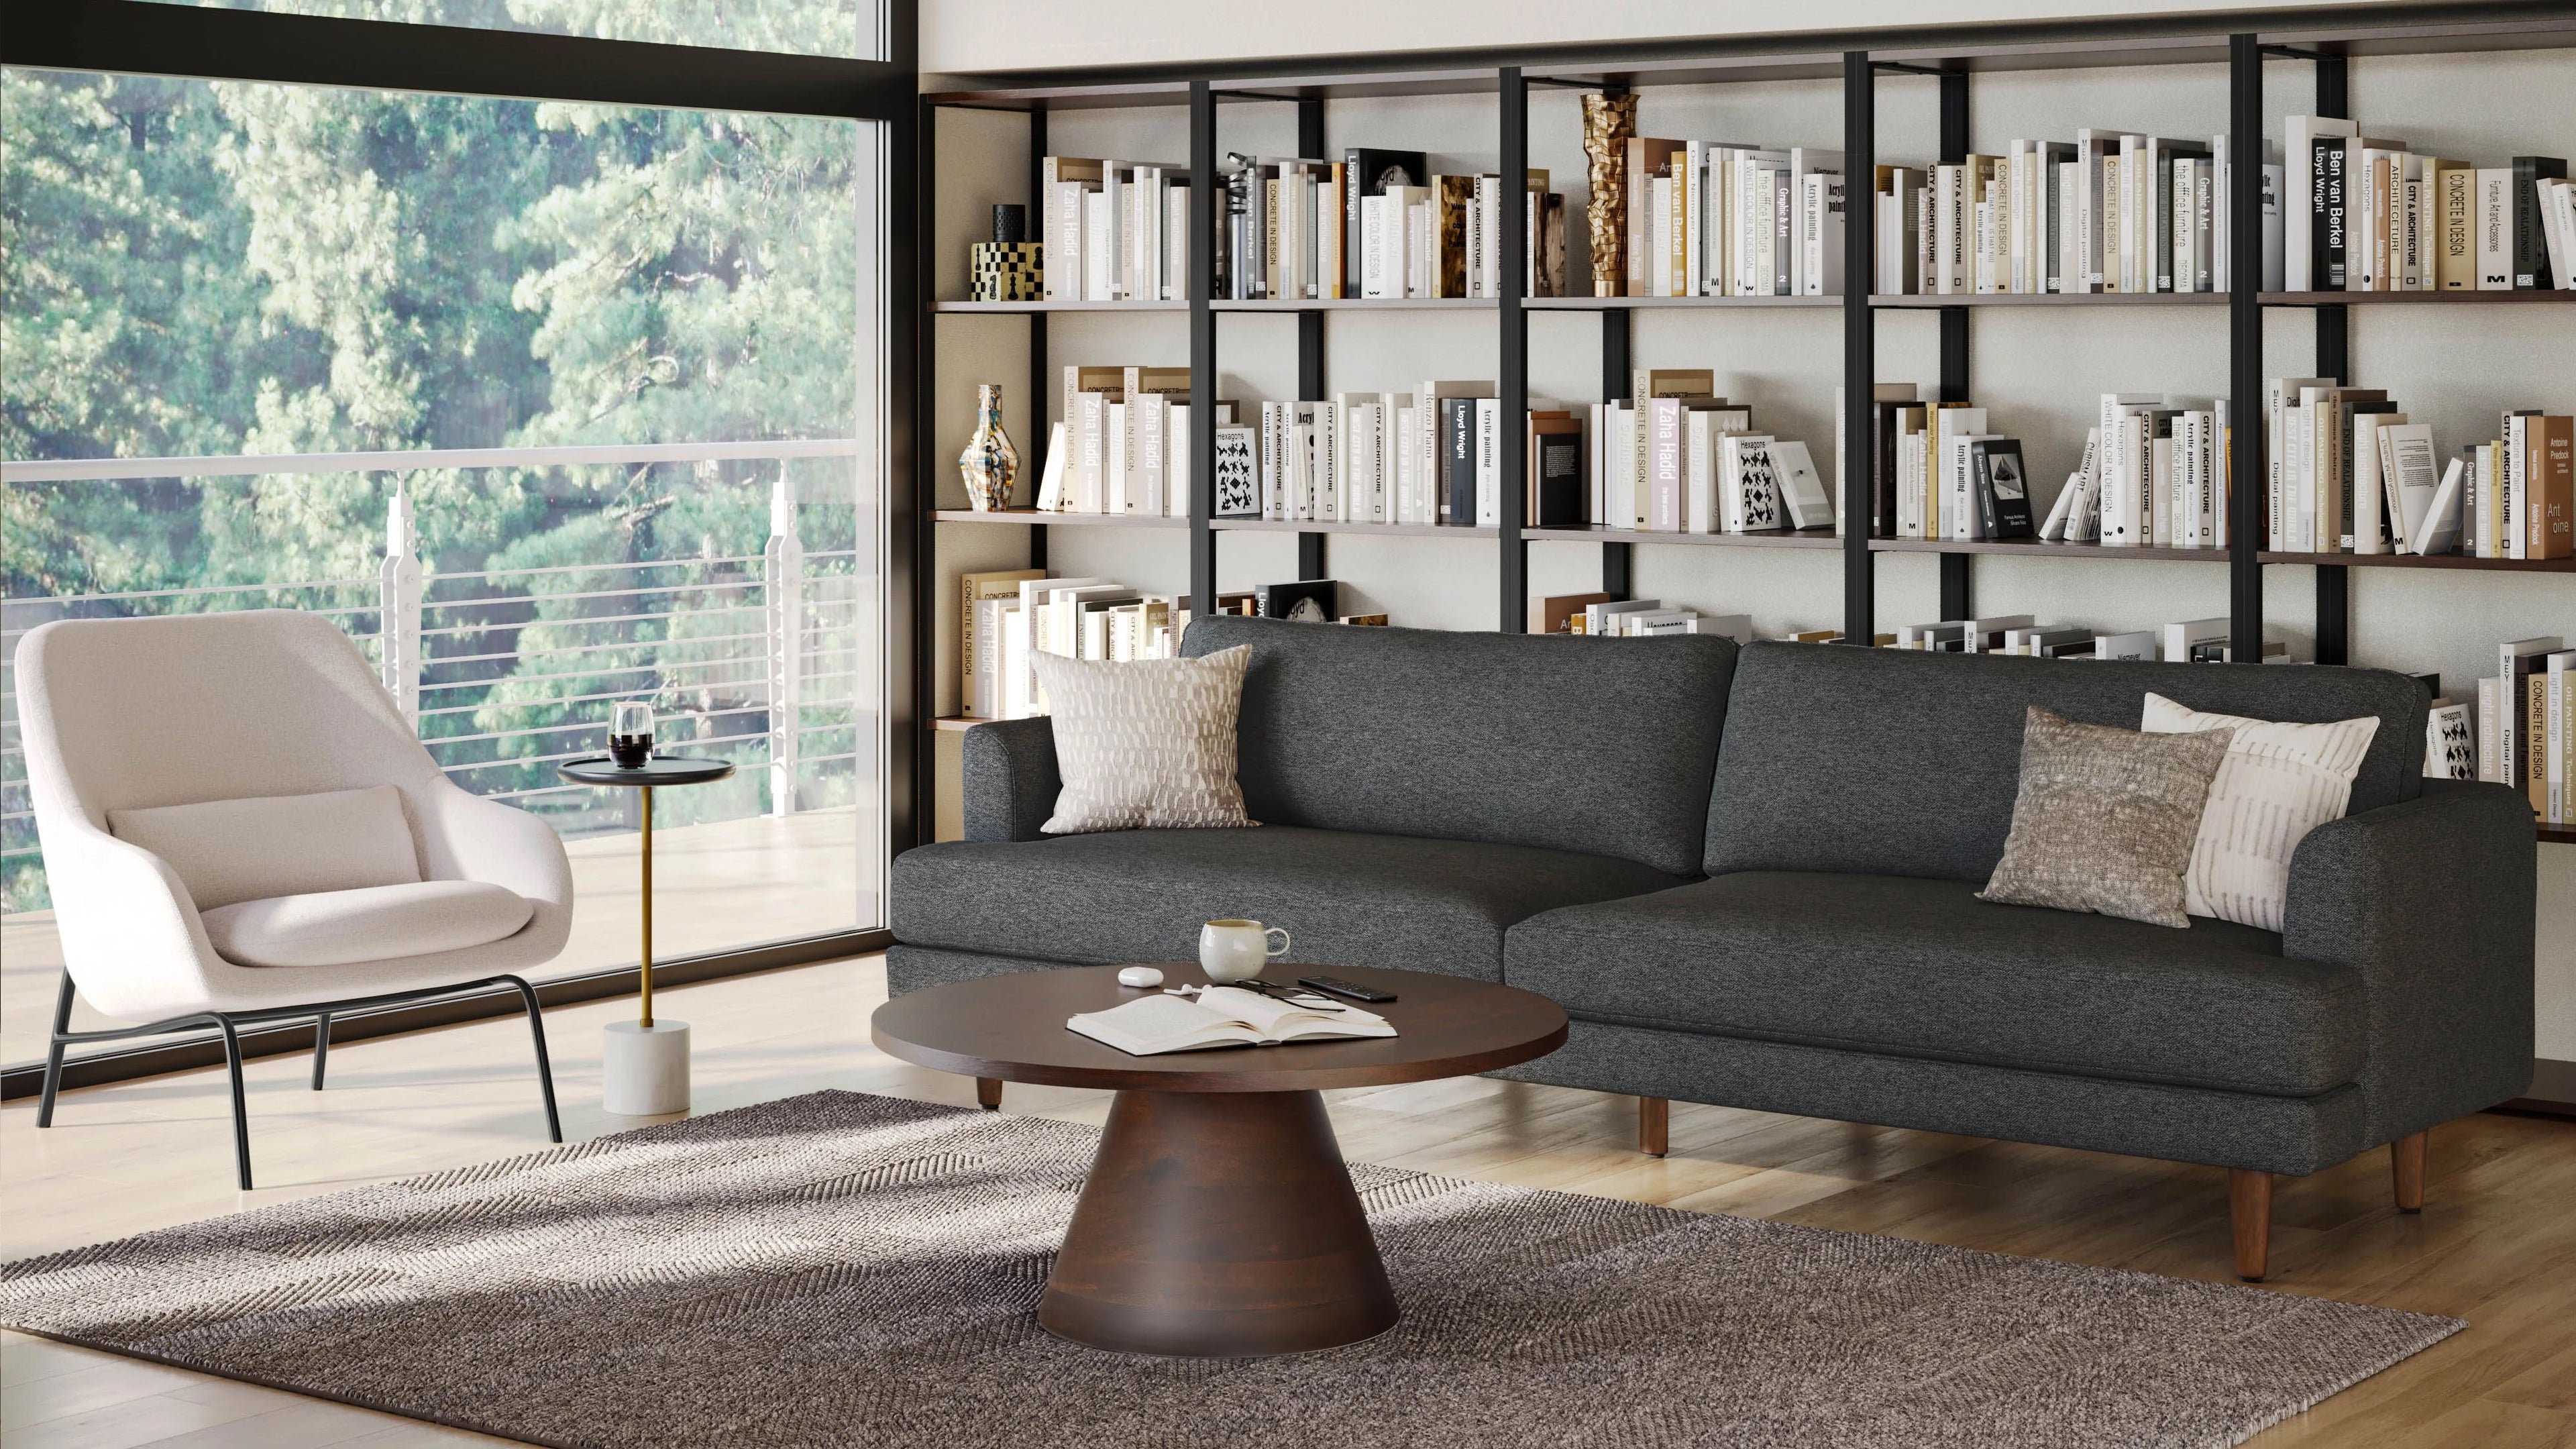 A modern living room features a dark grey sofa with multiple cushions, a round wooden coffee table with books and a cup on it, a white armchair by the window, and a large bookshelf filled with books. Glass doors open to a balcony with a view of trees.